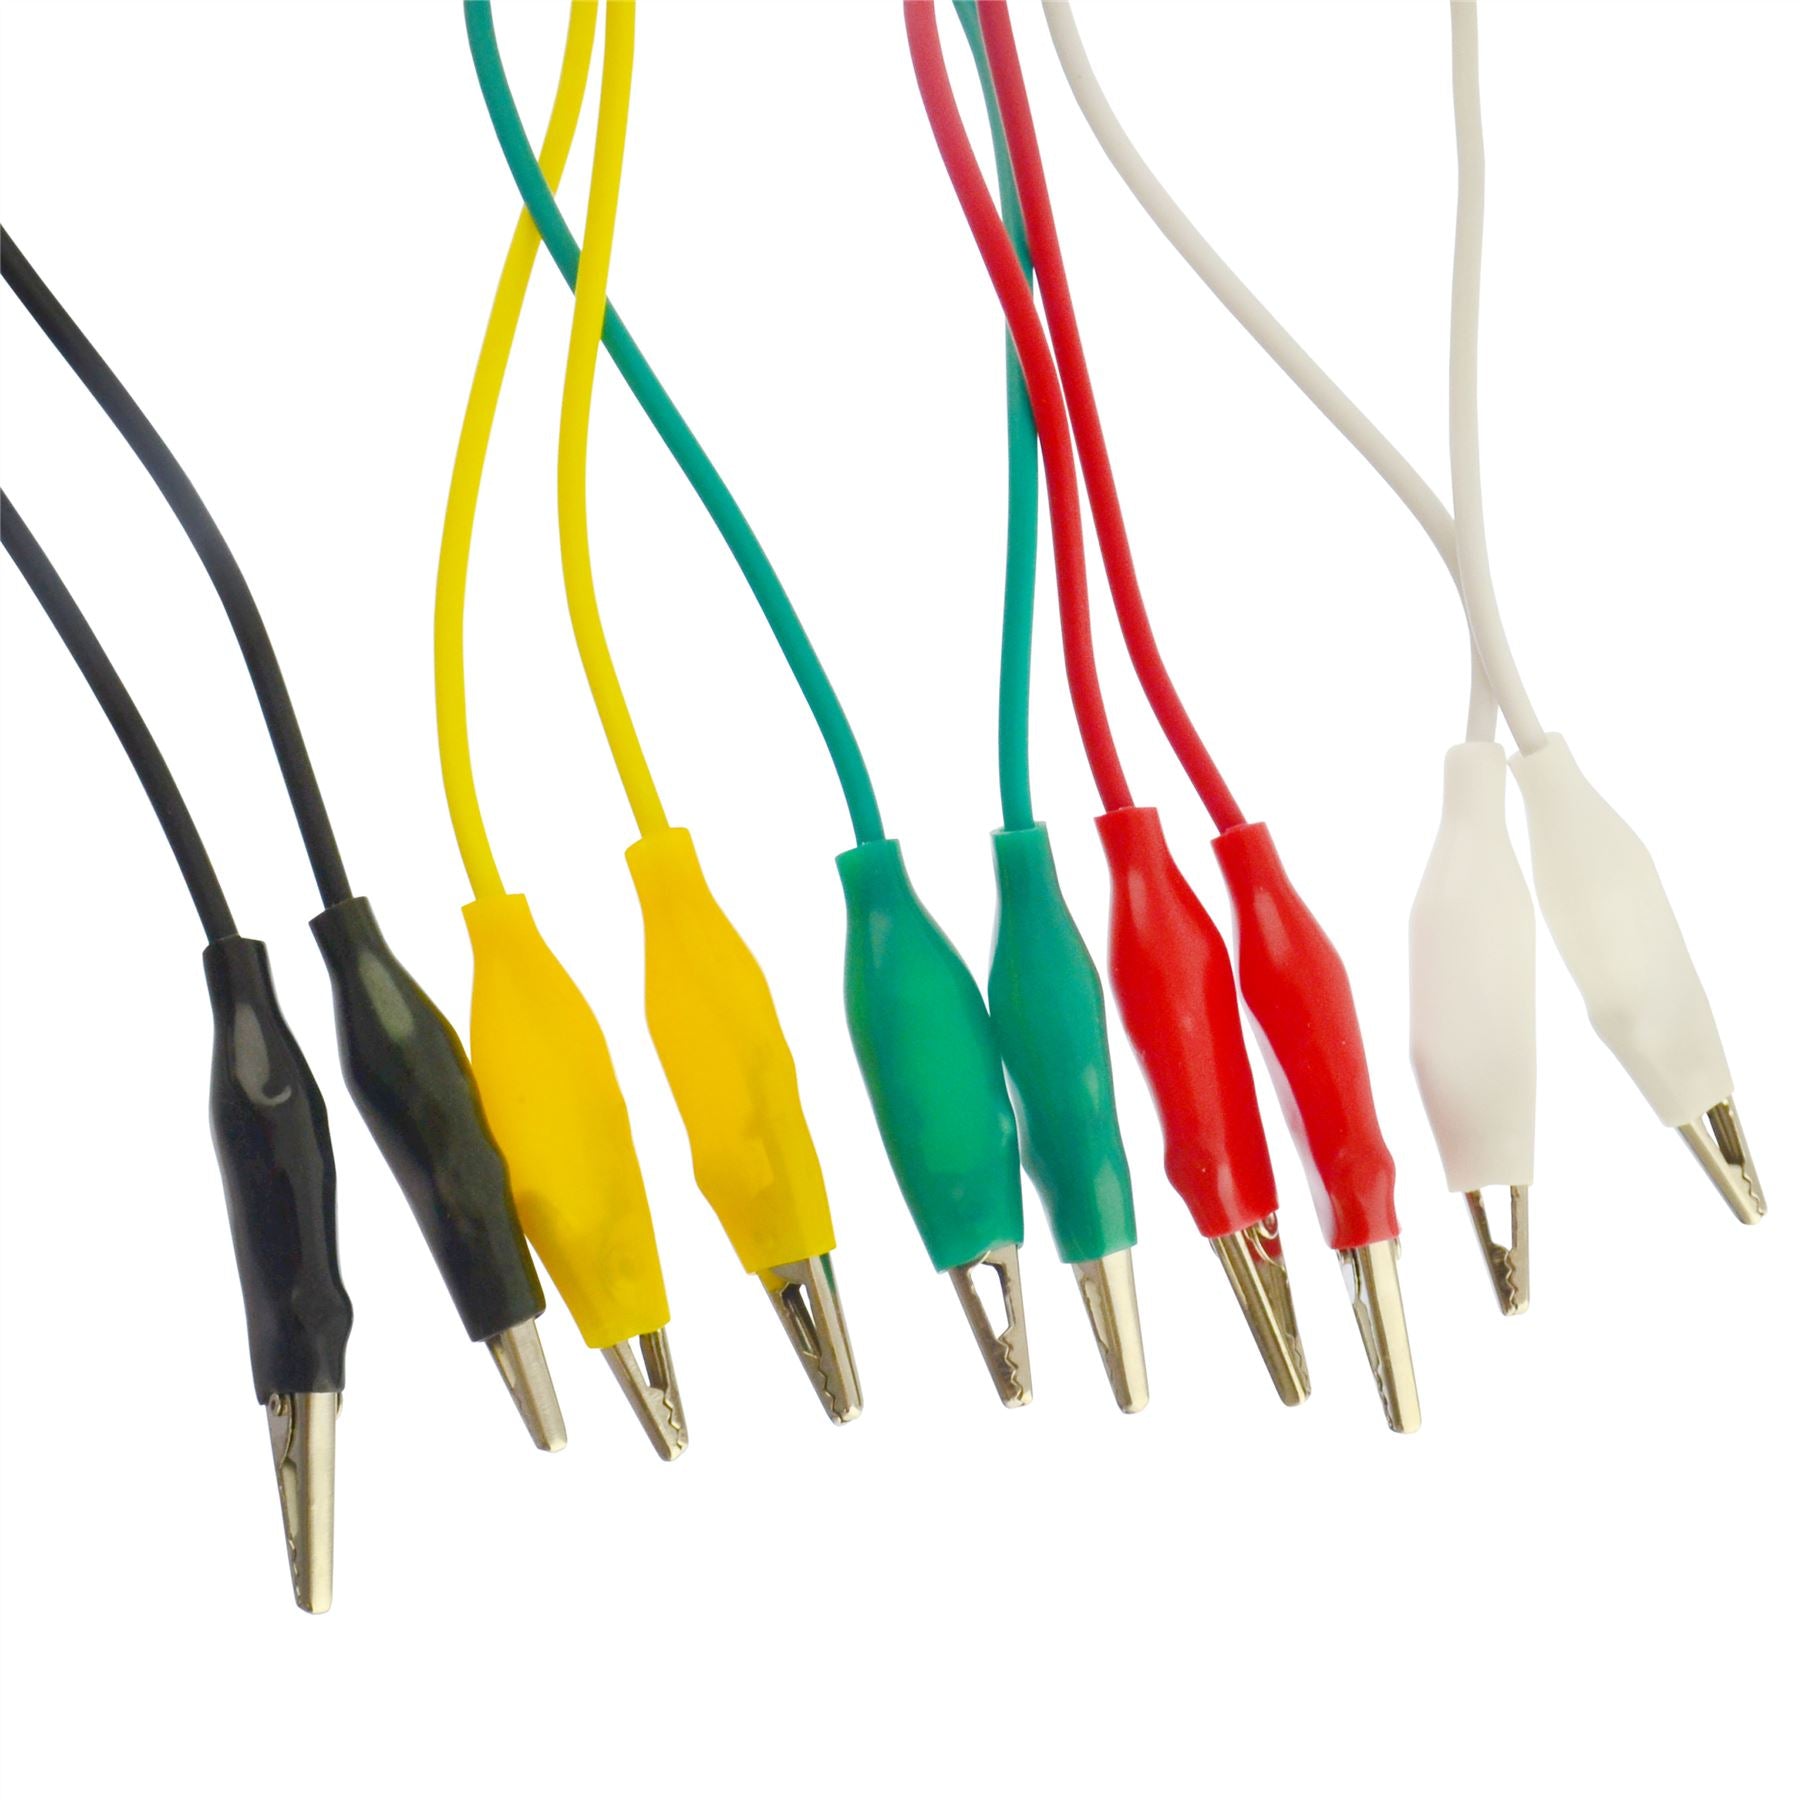 50cm Coloured Test Leads With 25mm Crocodile Alligator Clips 10 leads 5 colours